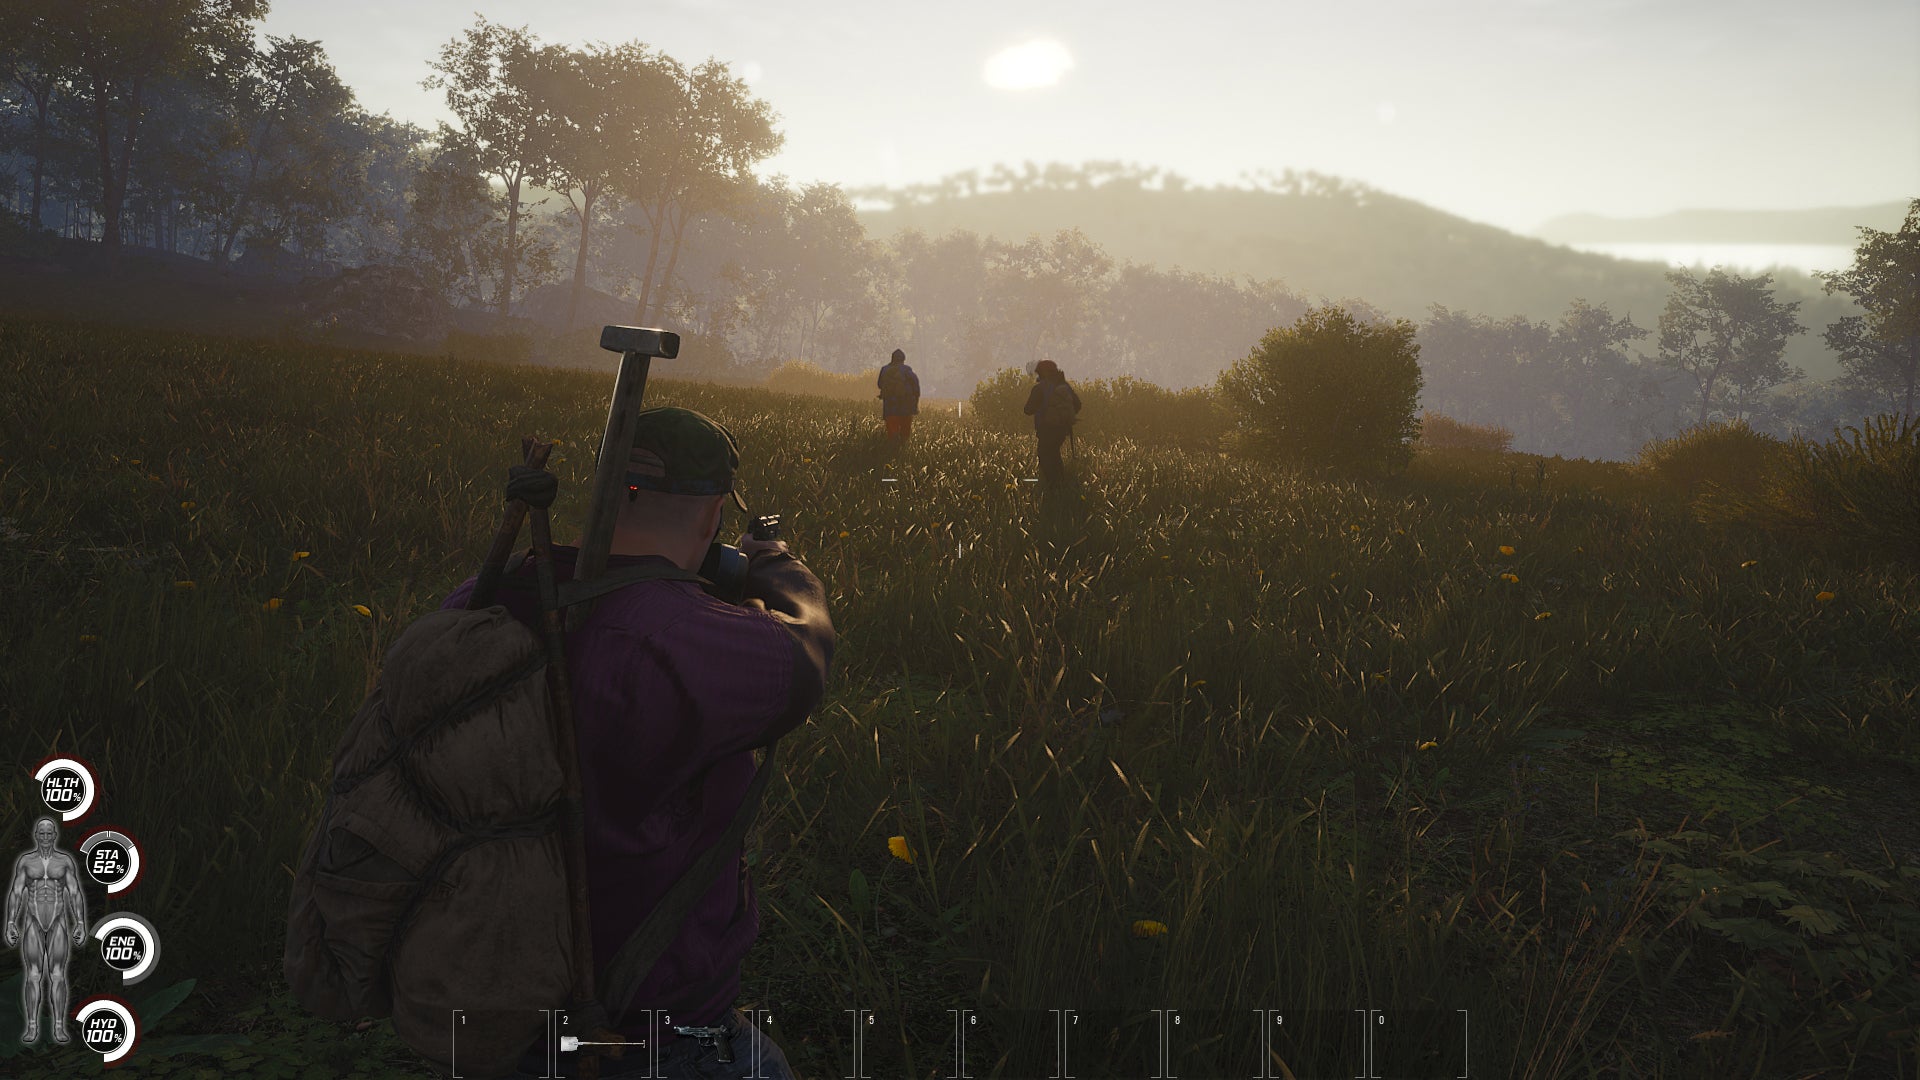 Image for Survival sim SCUM rushes ahead to become second-most watched Twitch game